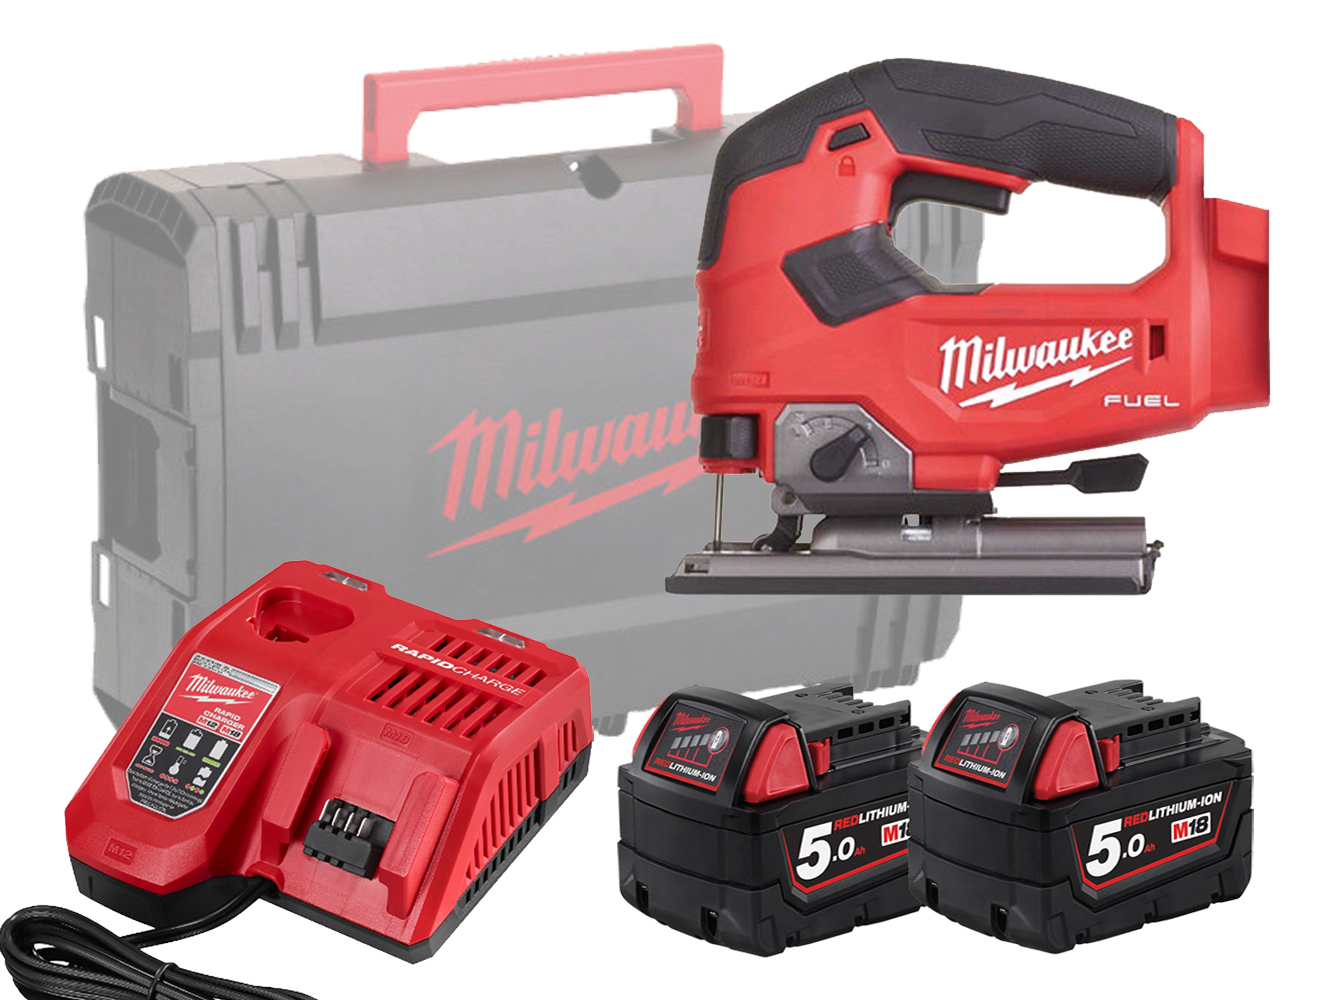 Milwaukee M18FJS 18V Fuel Jigsaw With Top-Handle and 5 Stage Pendulum Action - 5.0Ah Pack